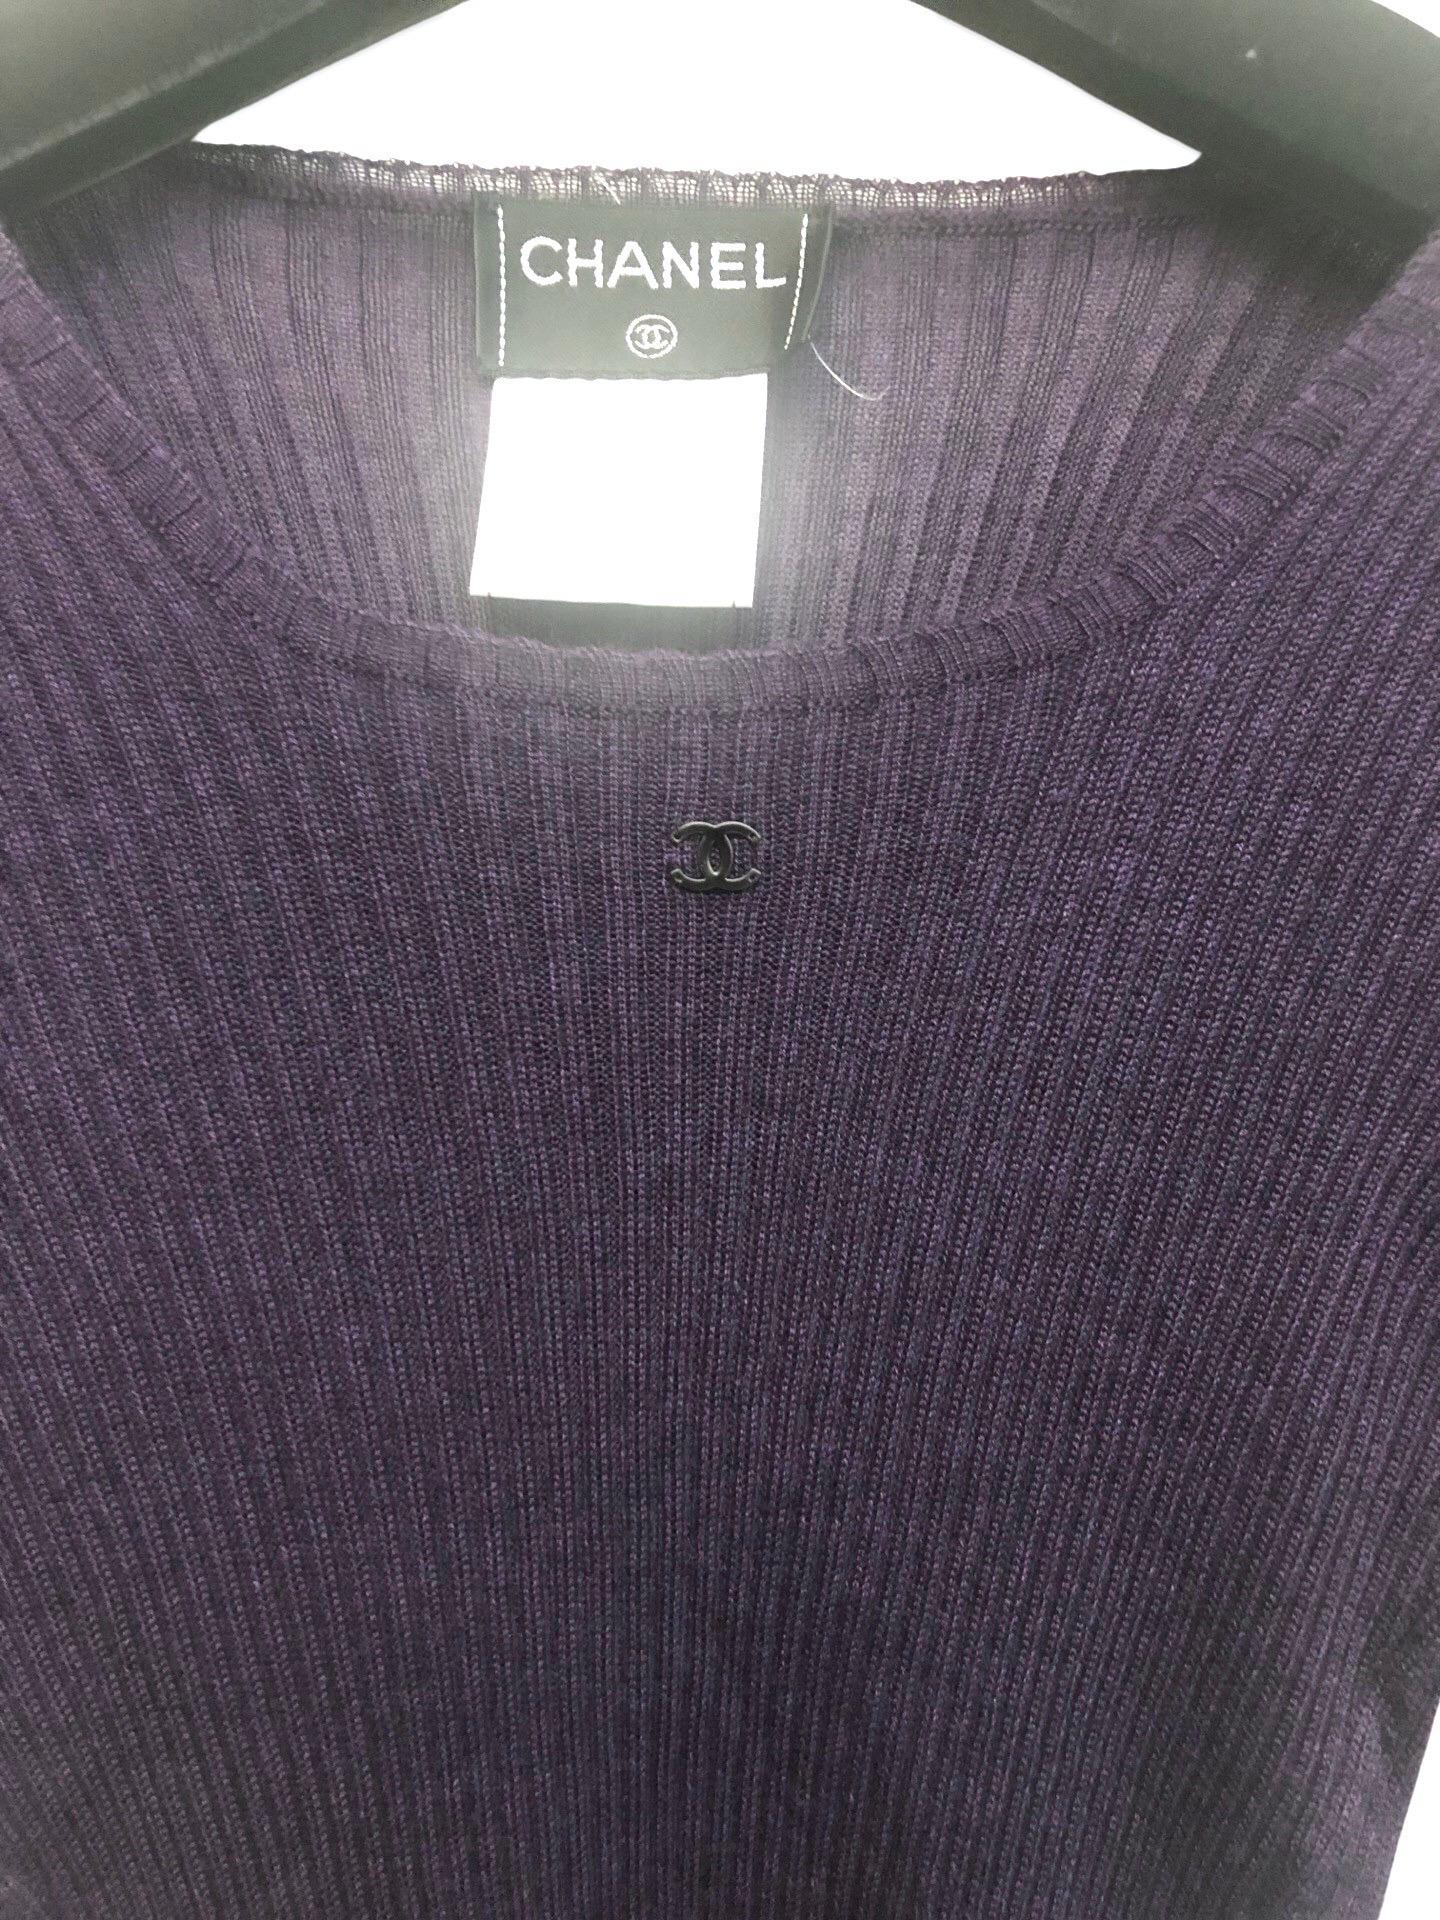 - Chanel dark purple cashmere and silk short sleeves top from A/W 1998.  

- CC hardware logo. 

- Size 40. 